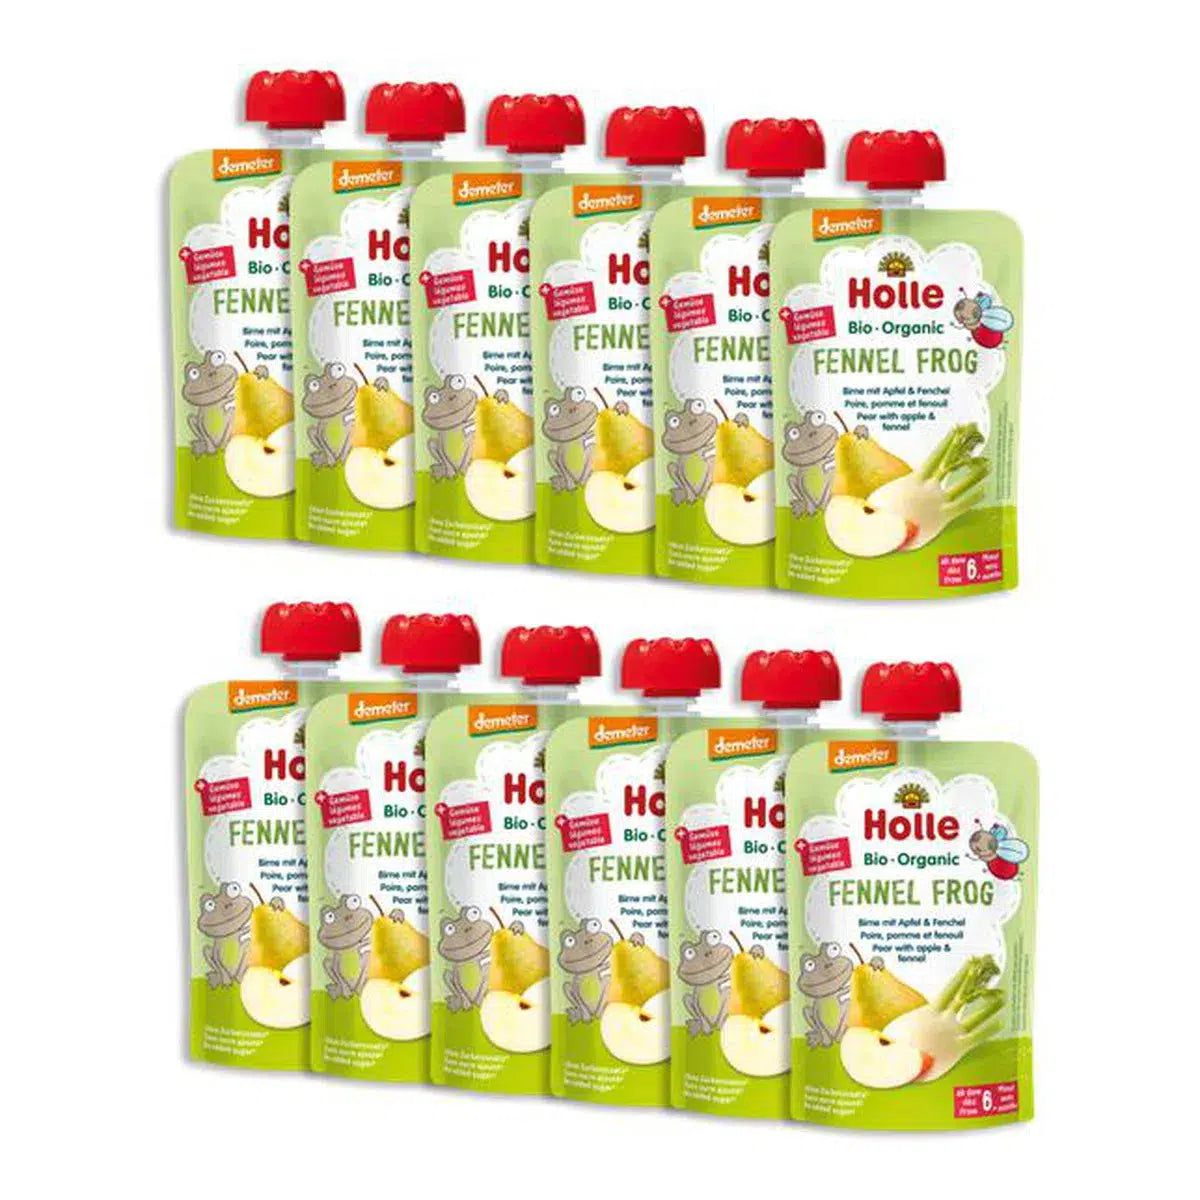 Holle Fennel Frog: Pear, Apple & Fennel (6+ Months) - 12 Pouches